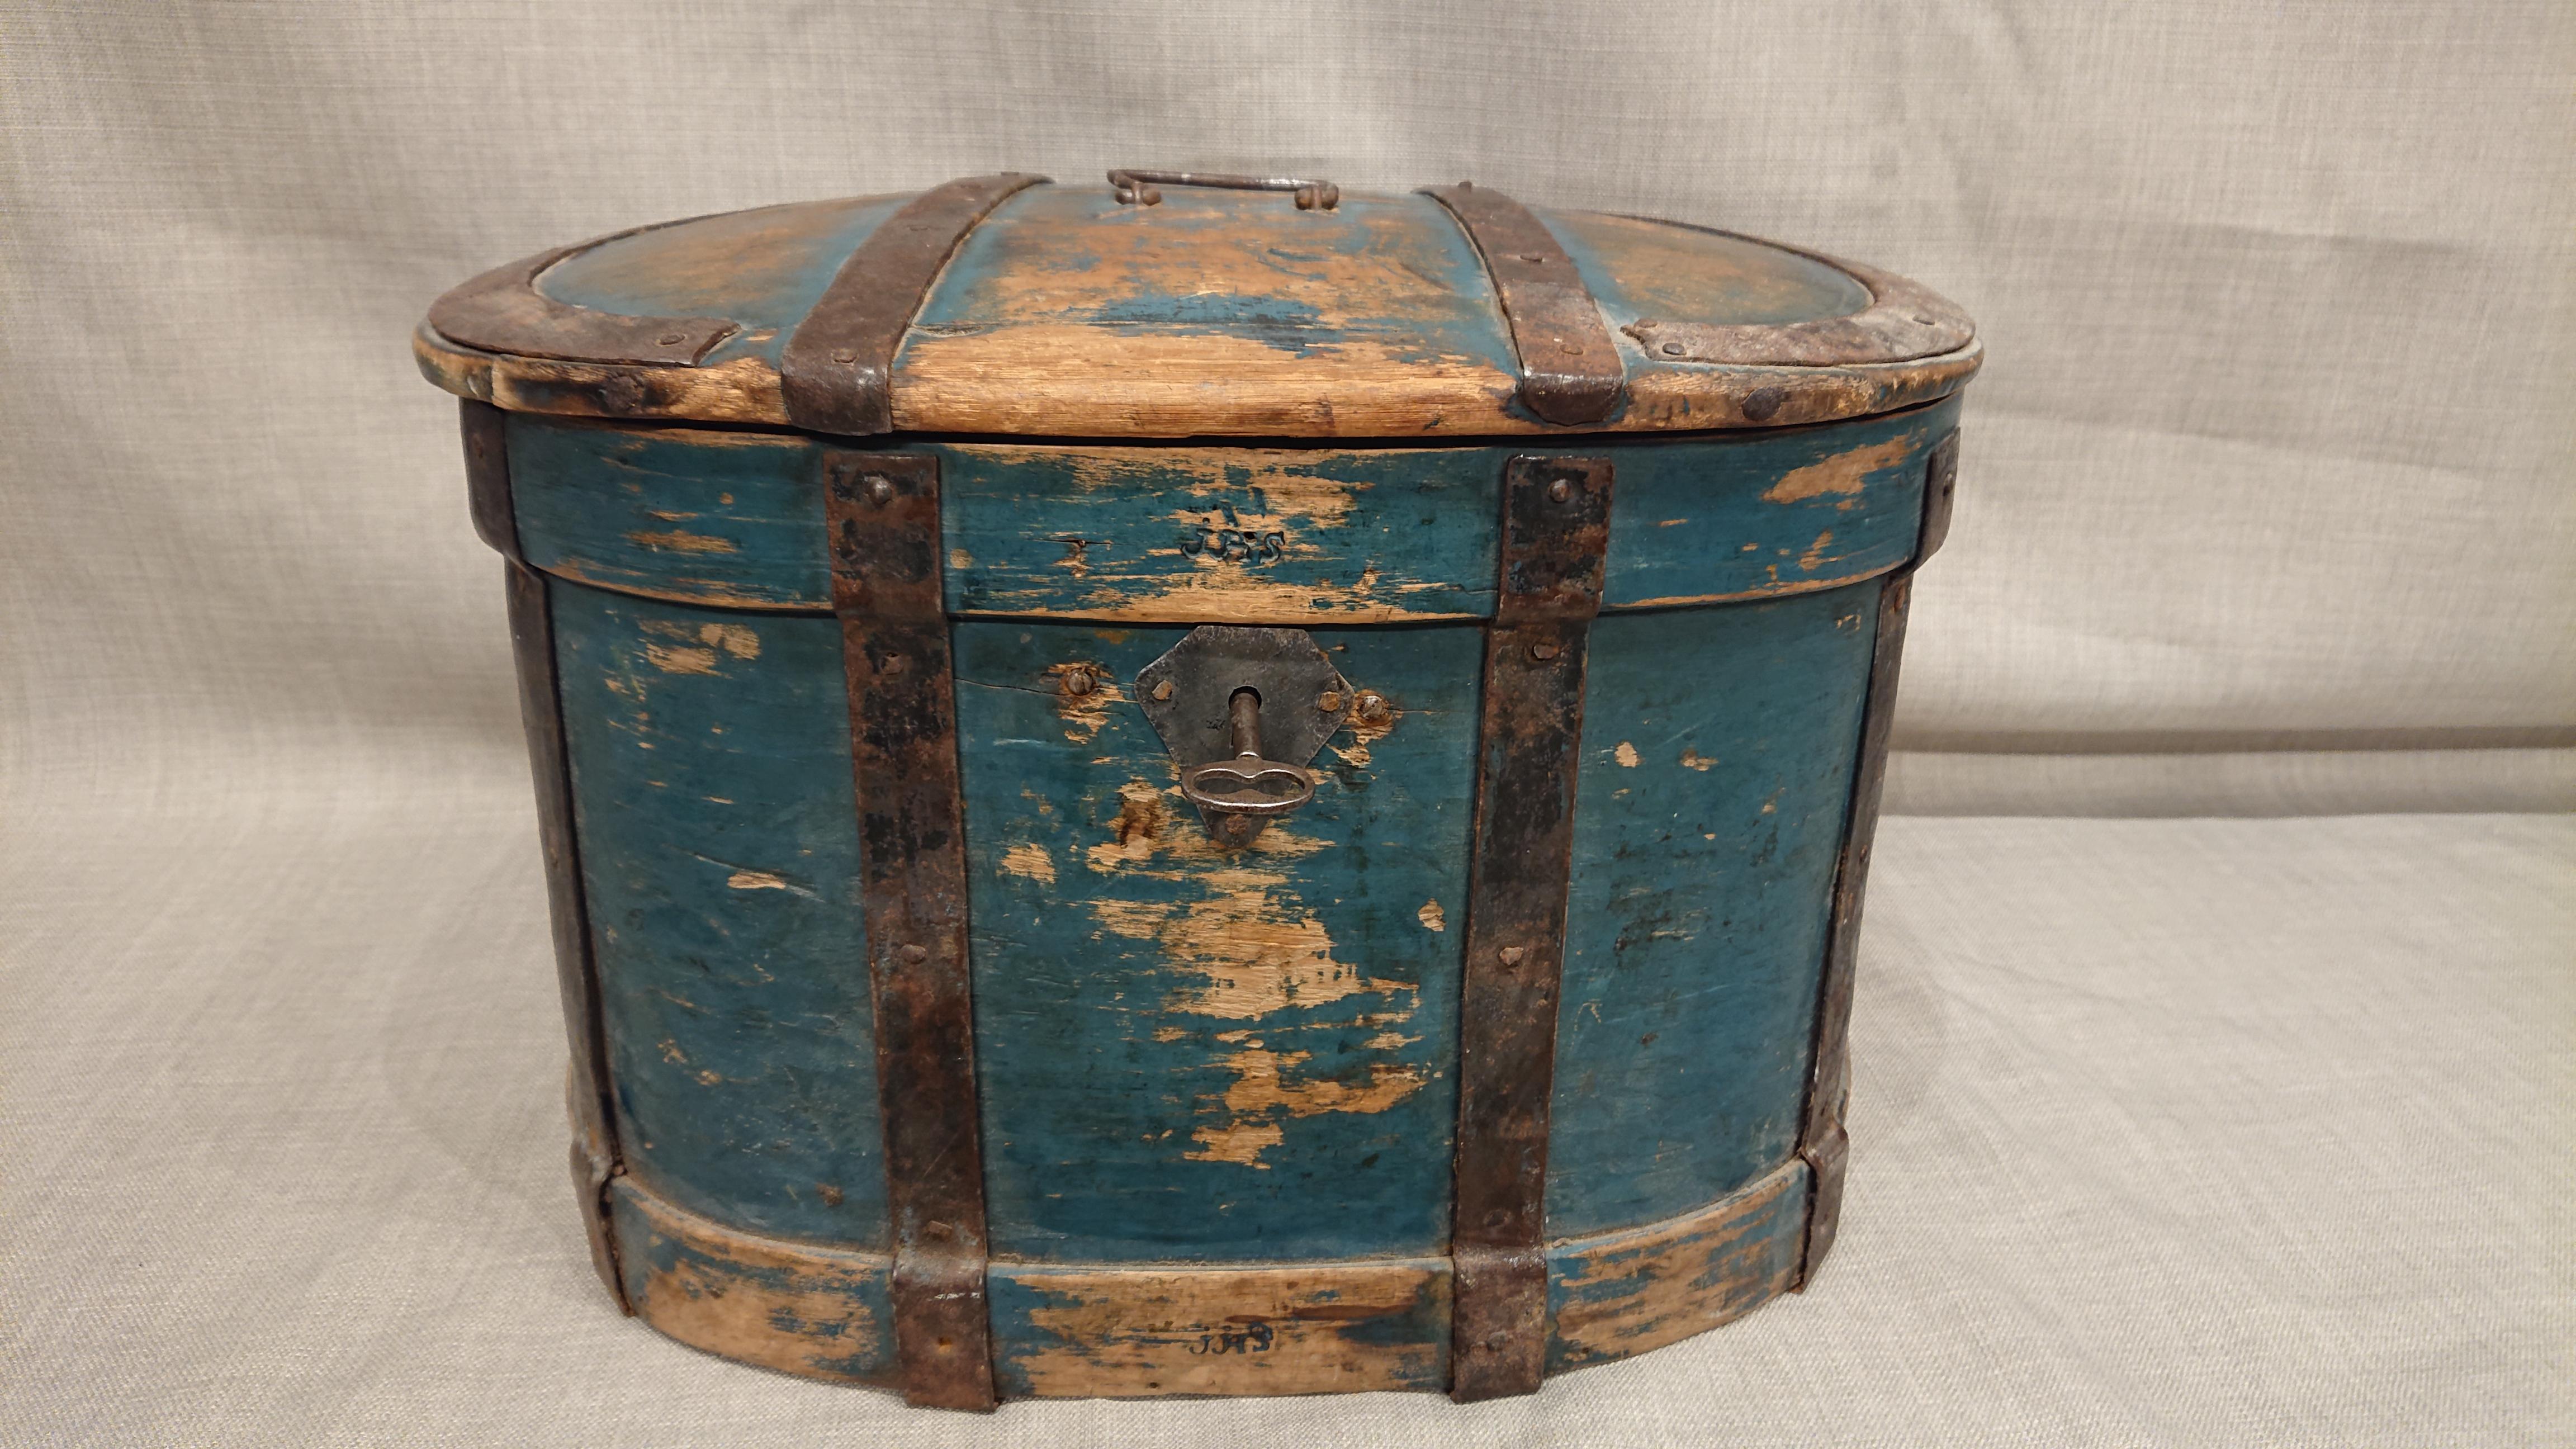 Early 19th century Swedish Folk Art travel box from Skelleftea Vasterbotten, Northern Sweden.
Beautiful untouched original paint.
Decorated with hand wrought iron around the box and over the lid.
Working lock and key.
Old wooden repairs on the